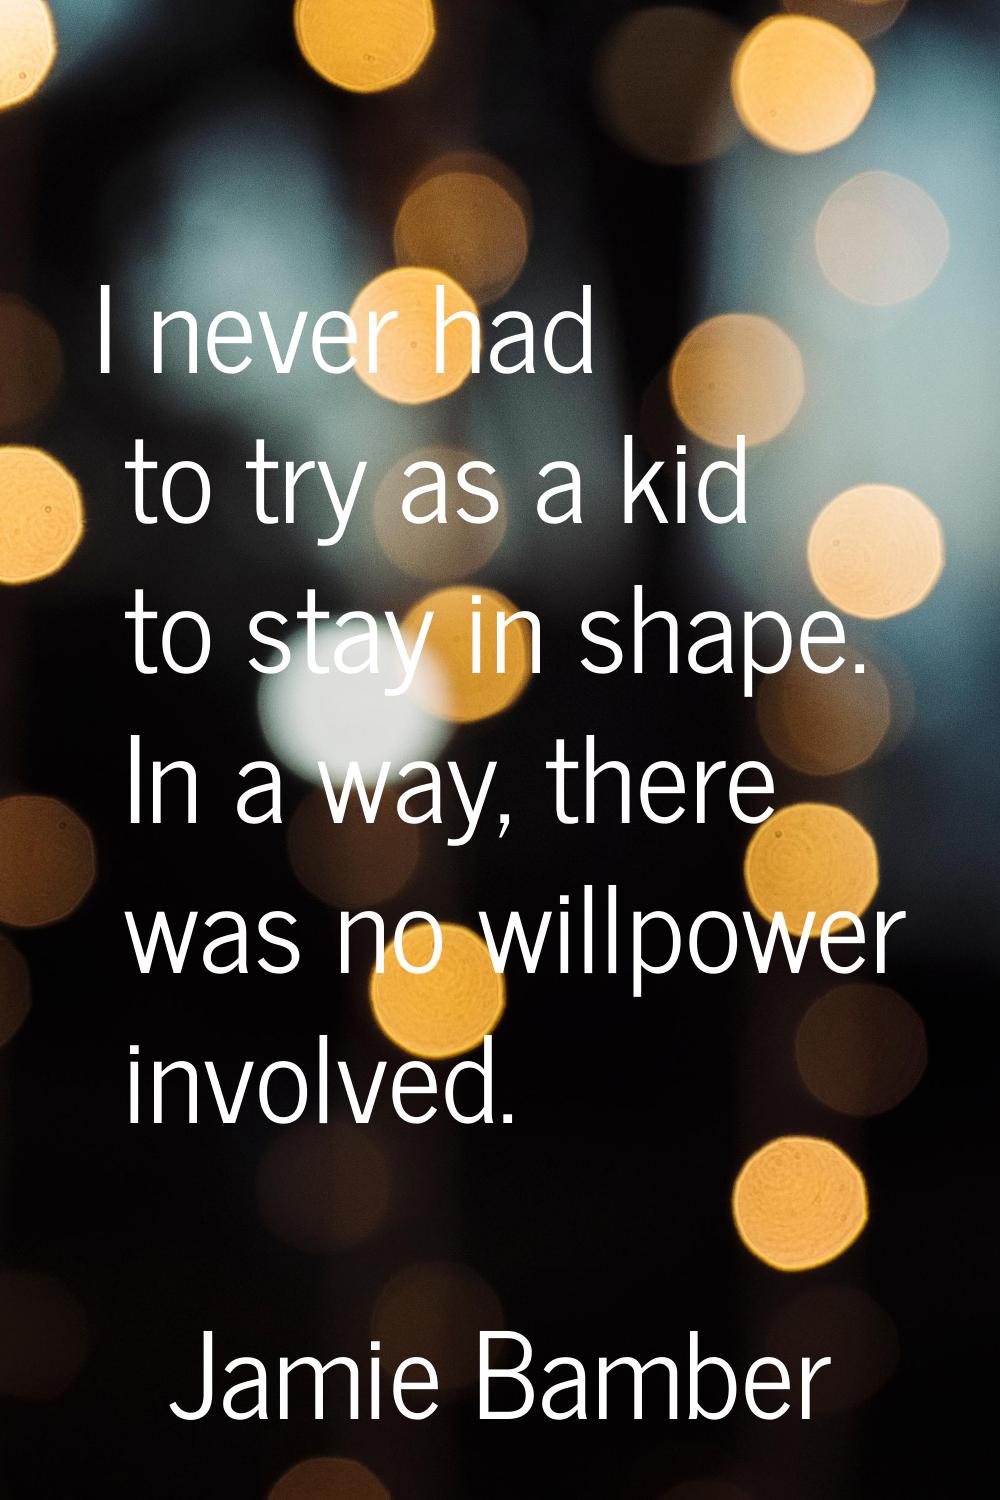 I never had to try as a kid to stay in shape. In a way, there was no willpower involved.